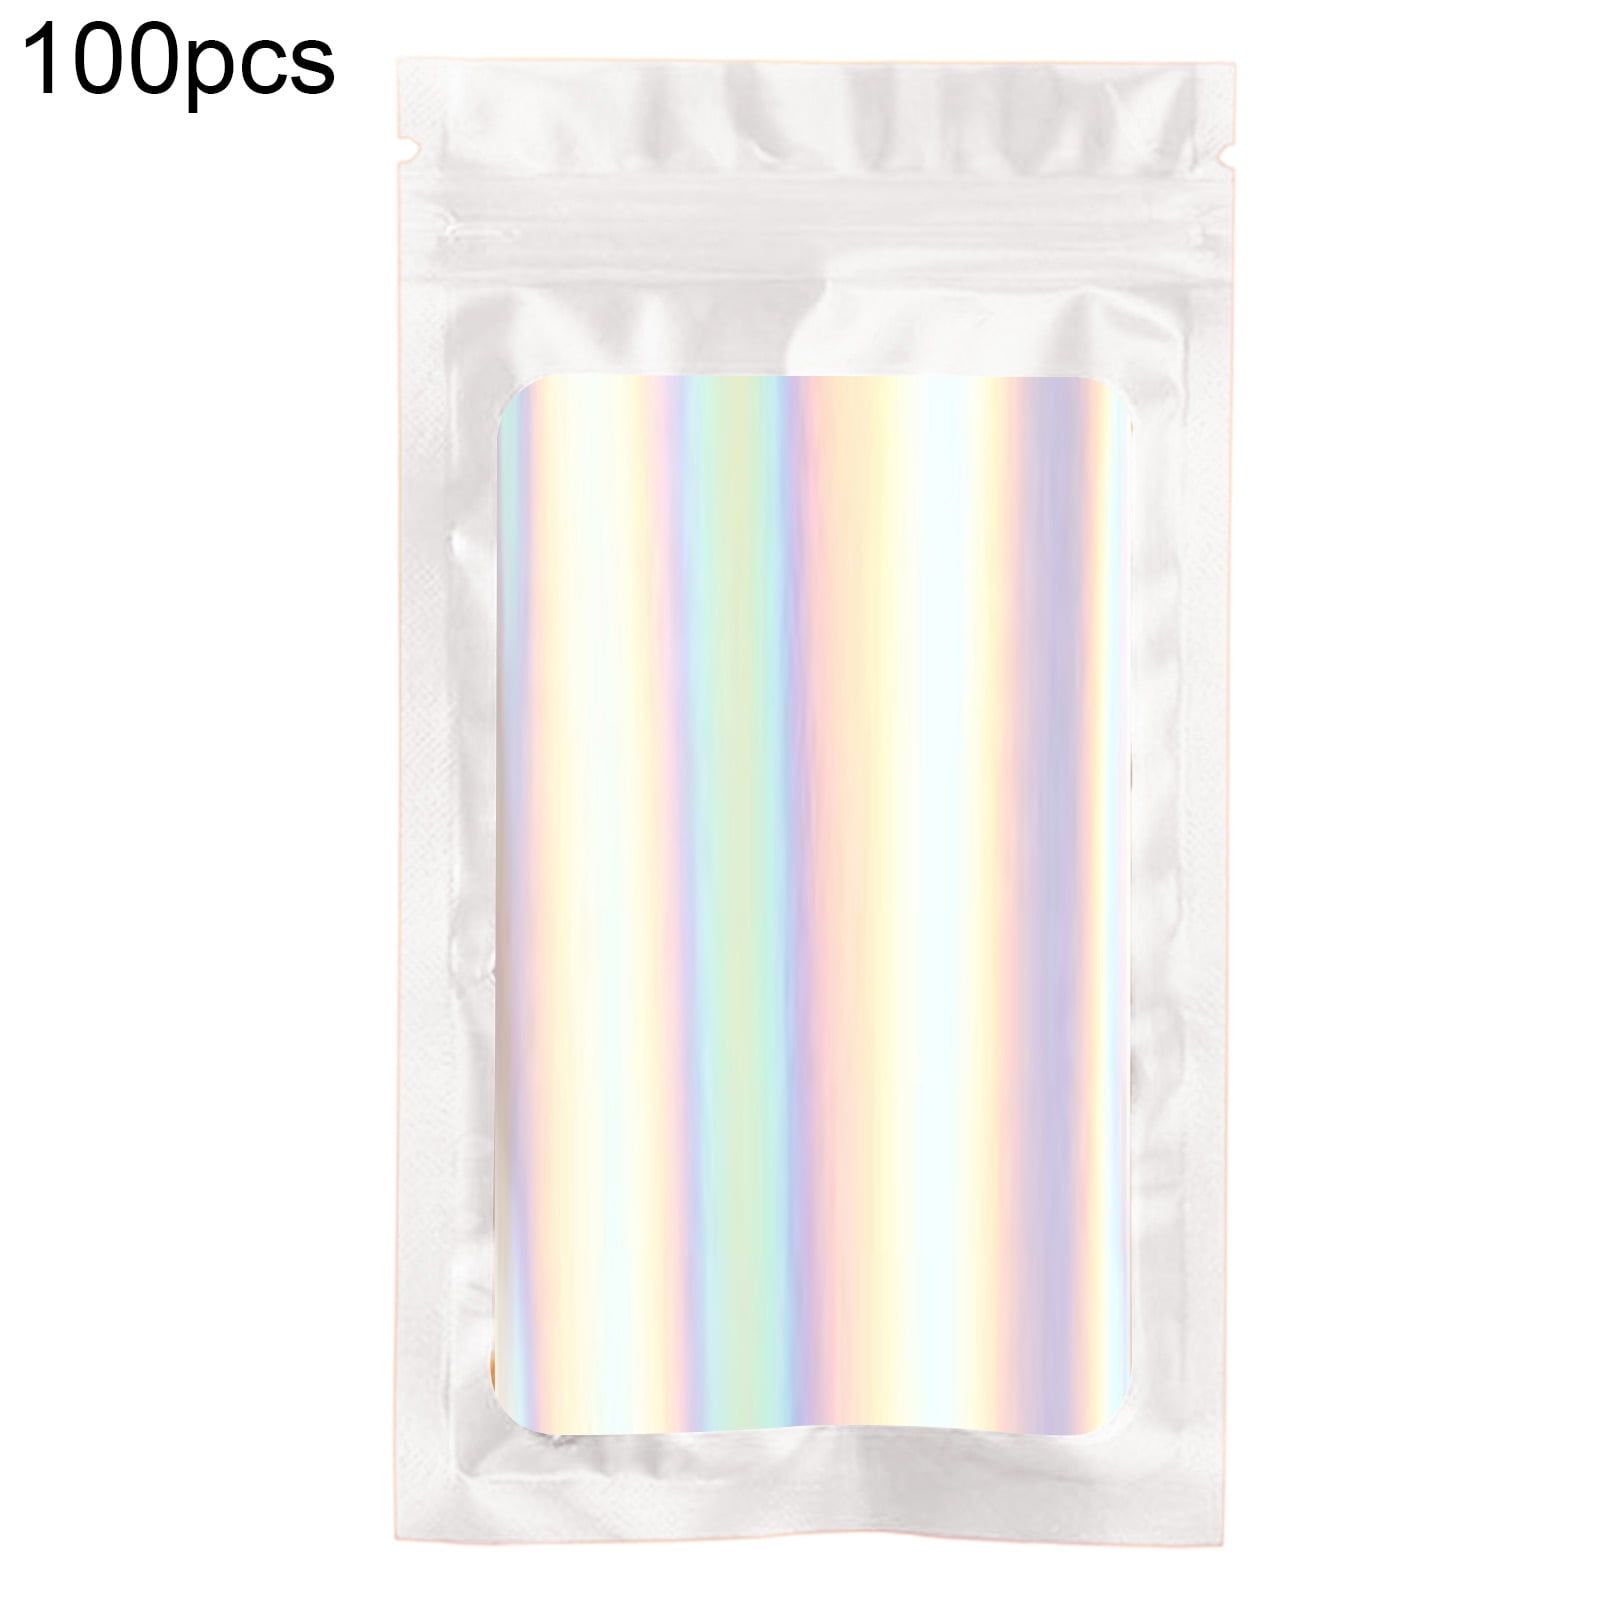 High quality white plastic ziplock product bags with display window 18cm x 12cm 